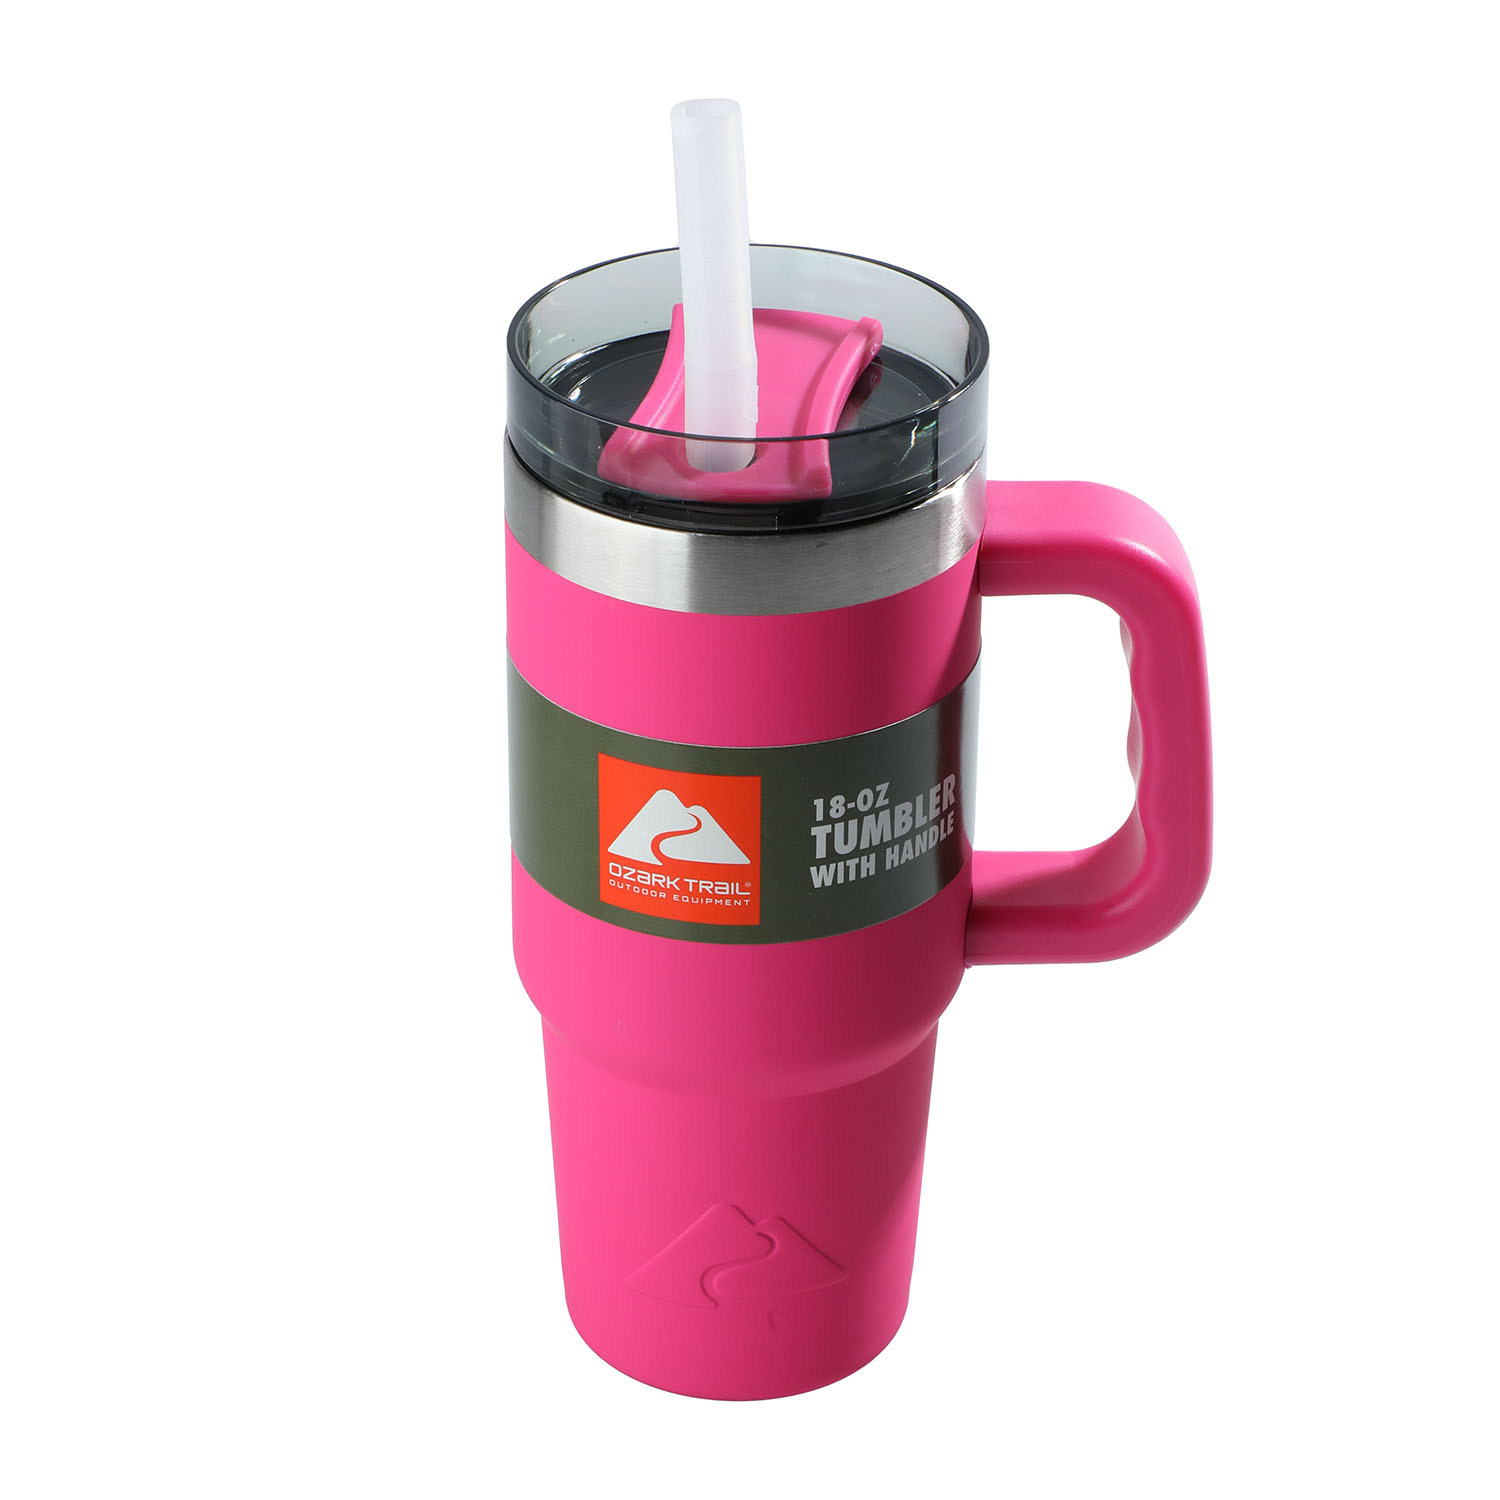 Ozark Trail 18 oz Insulated Stainless Steel Tumbler with Handle - Hot Pink, Size: 18 ounce